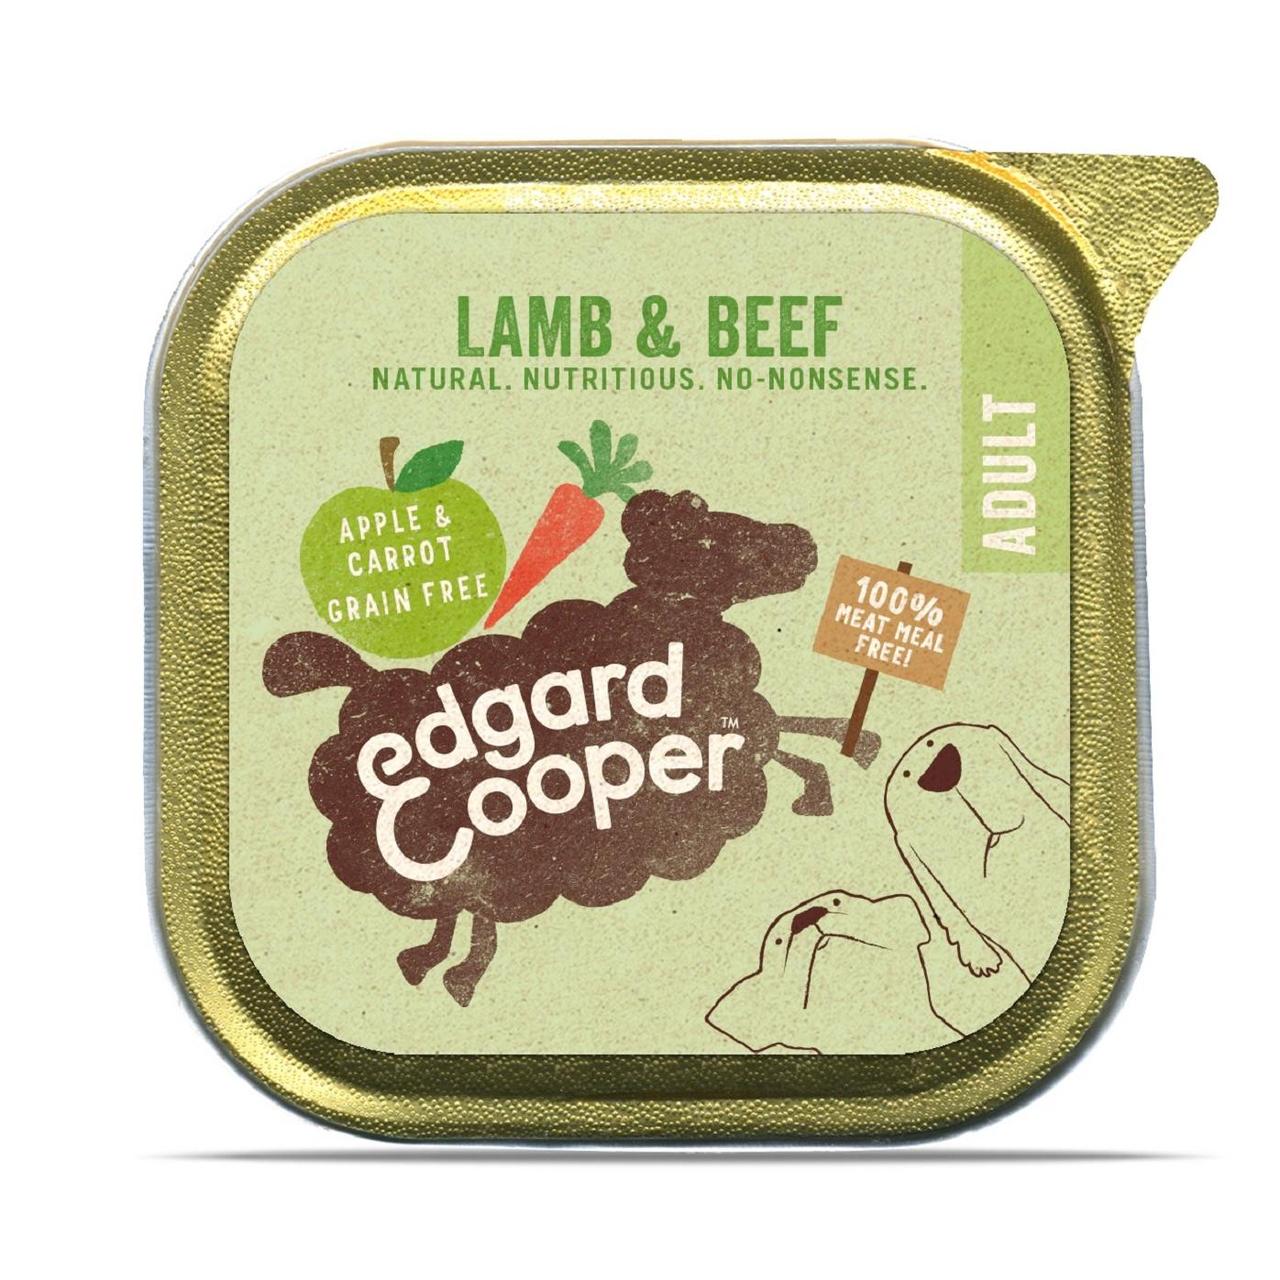 An image of Edgard & Cooper Dog Cup Adult Lamb, Beef, Carrots and Apples